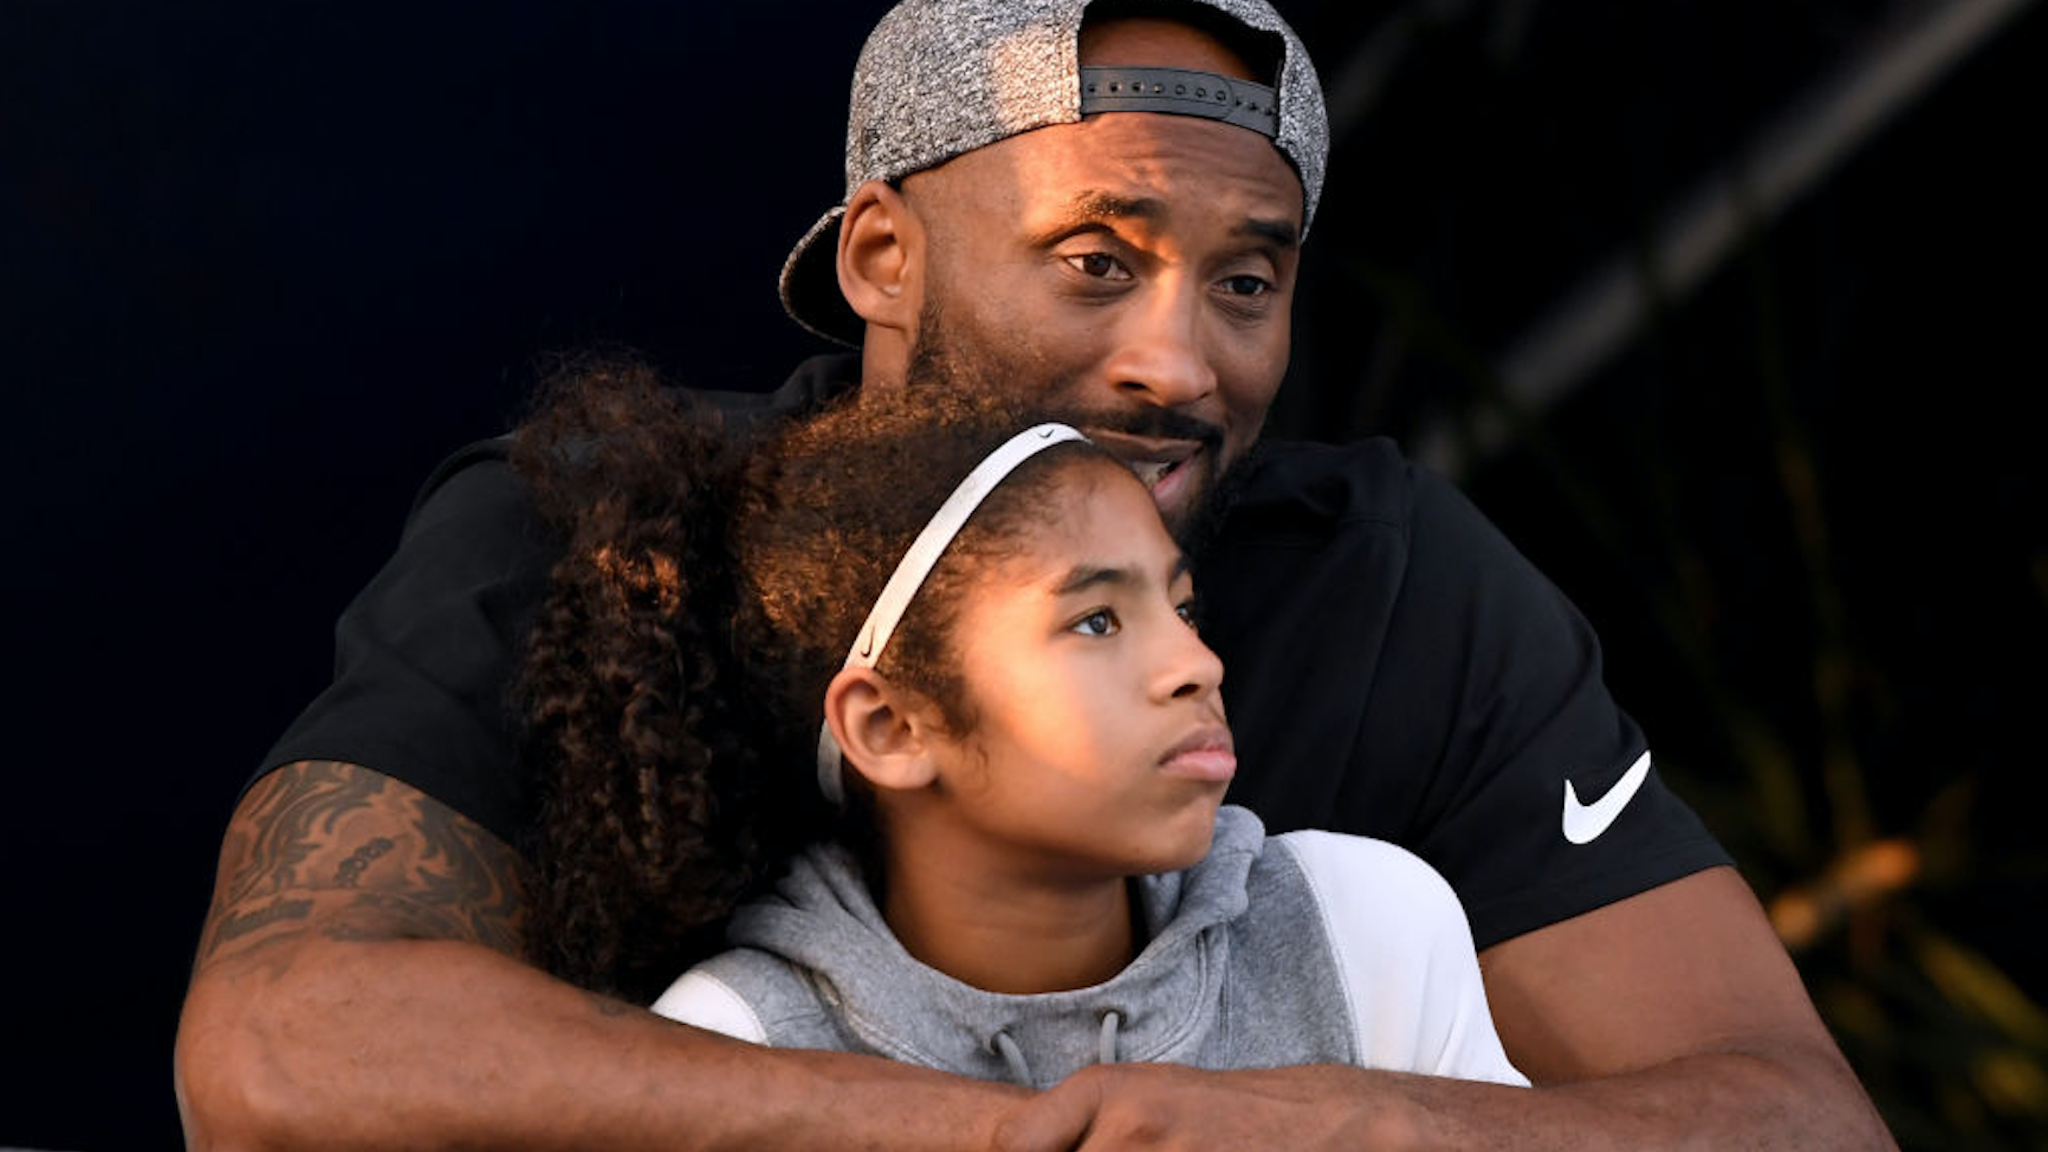 Kobe Bryant and daughter Gianna Bryant watch during day 2 of the Phillips 66 National Swimming Championships at the Woollett Aquatics Center on July 26, 2018 in Irvine, California.